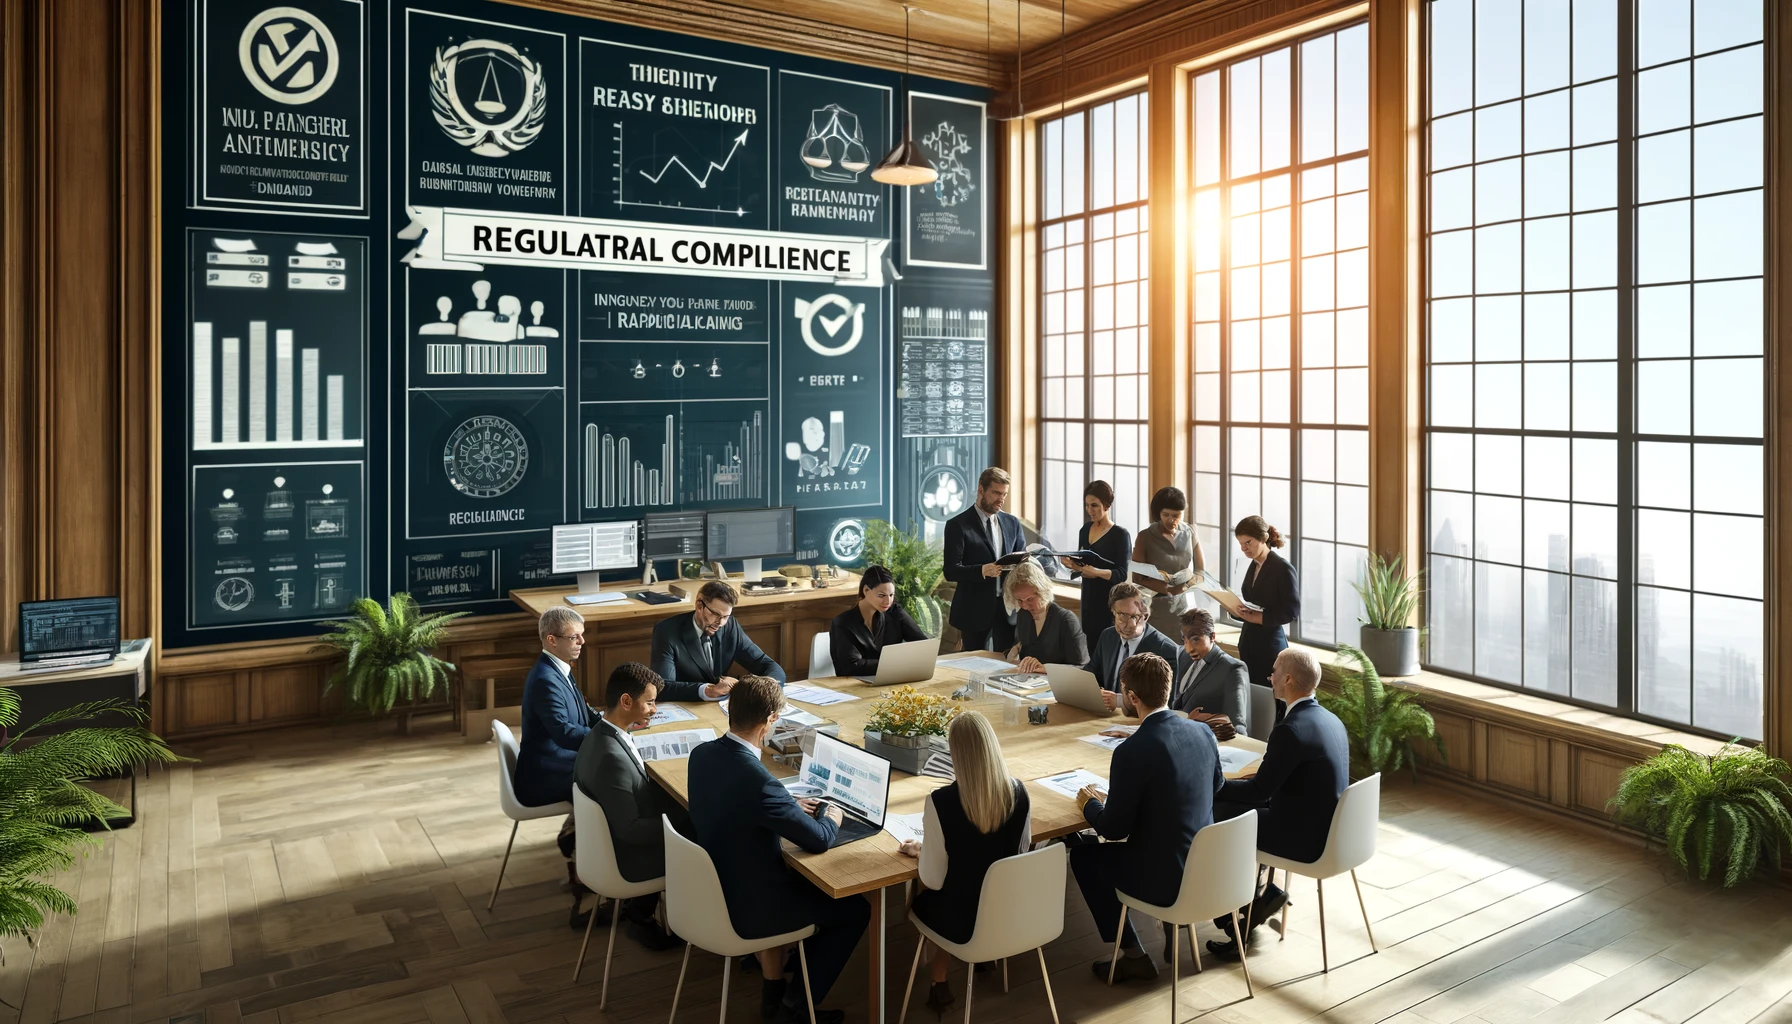 An image depicting a bright and welcoming office setting, where professionals collaborate on regulatory compliance in the financial sector. This visual highlights the importance of compliance in ensuring financial stability and trust.